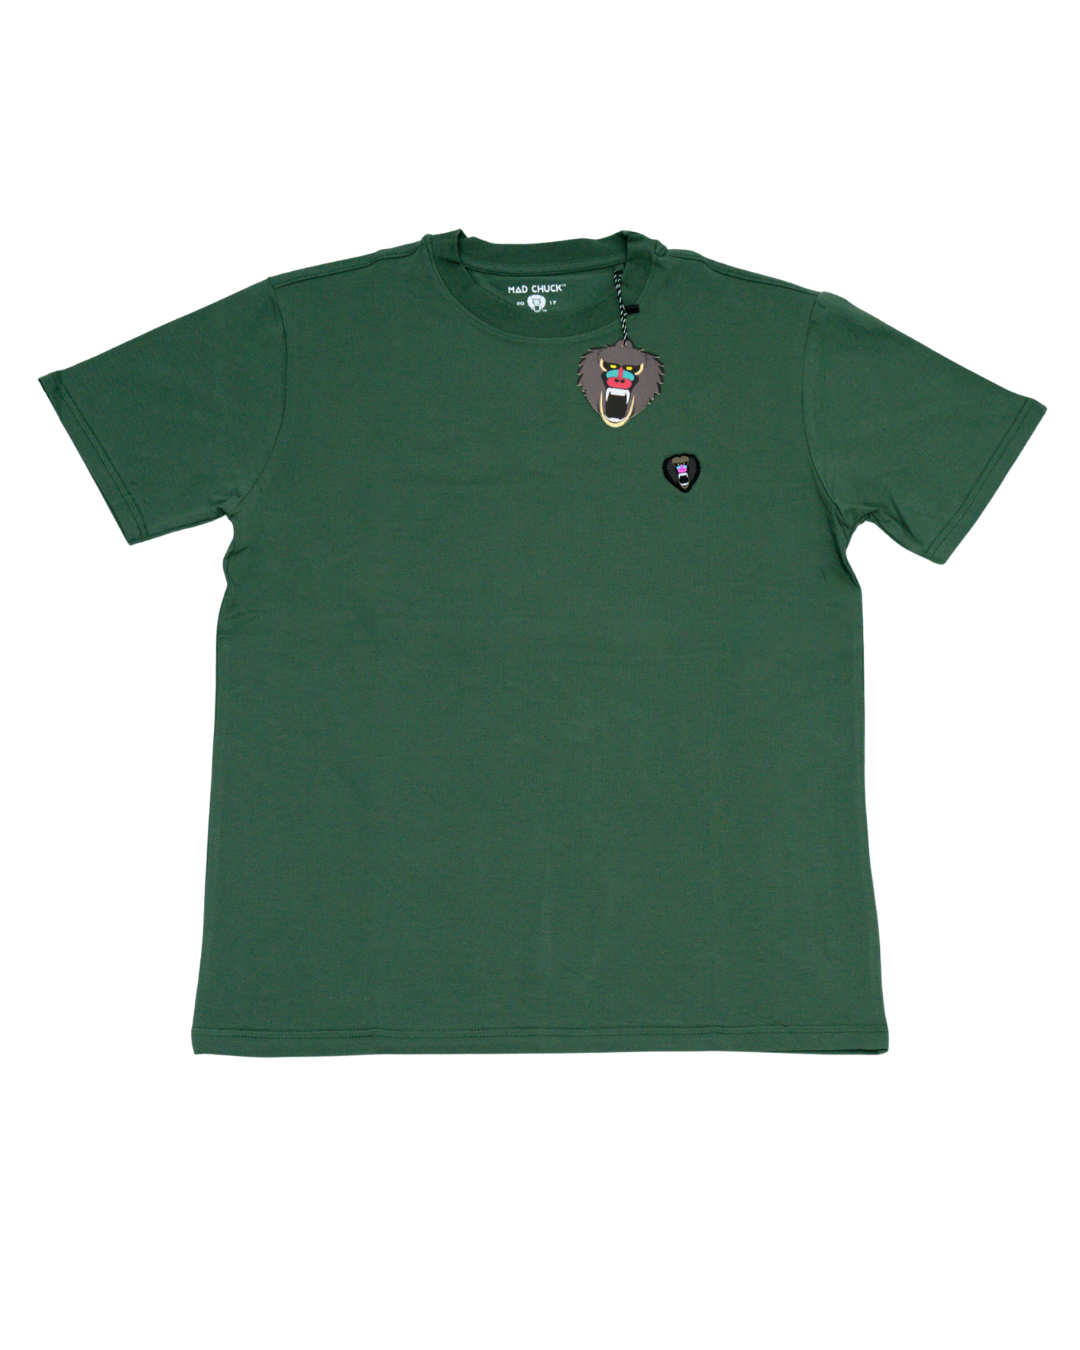 SAGE CREW NECK T SHIRT NEW RUBBER PATCH - Mad Chuck™